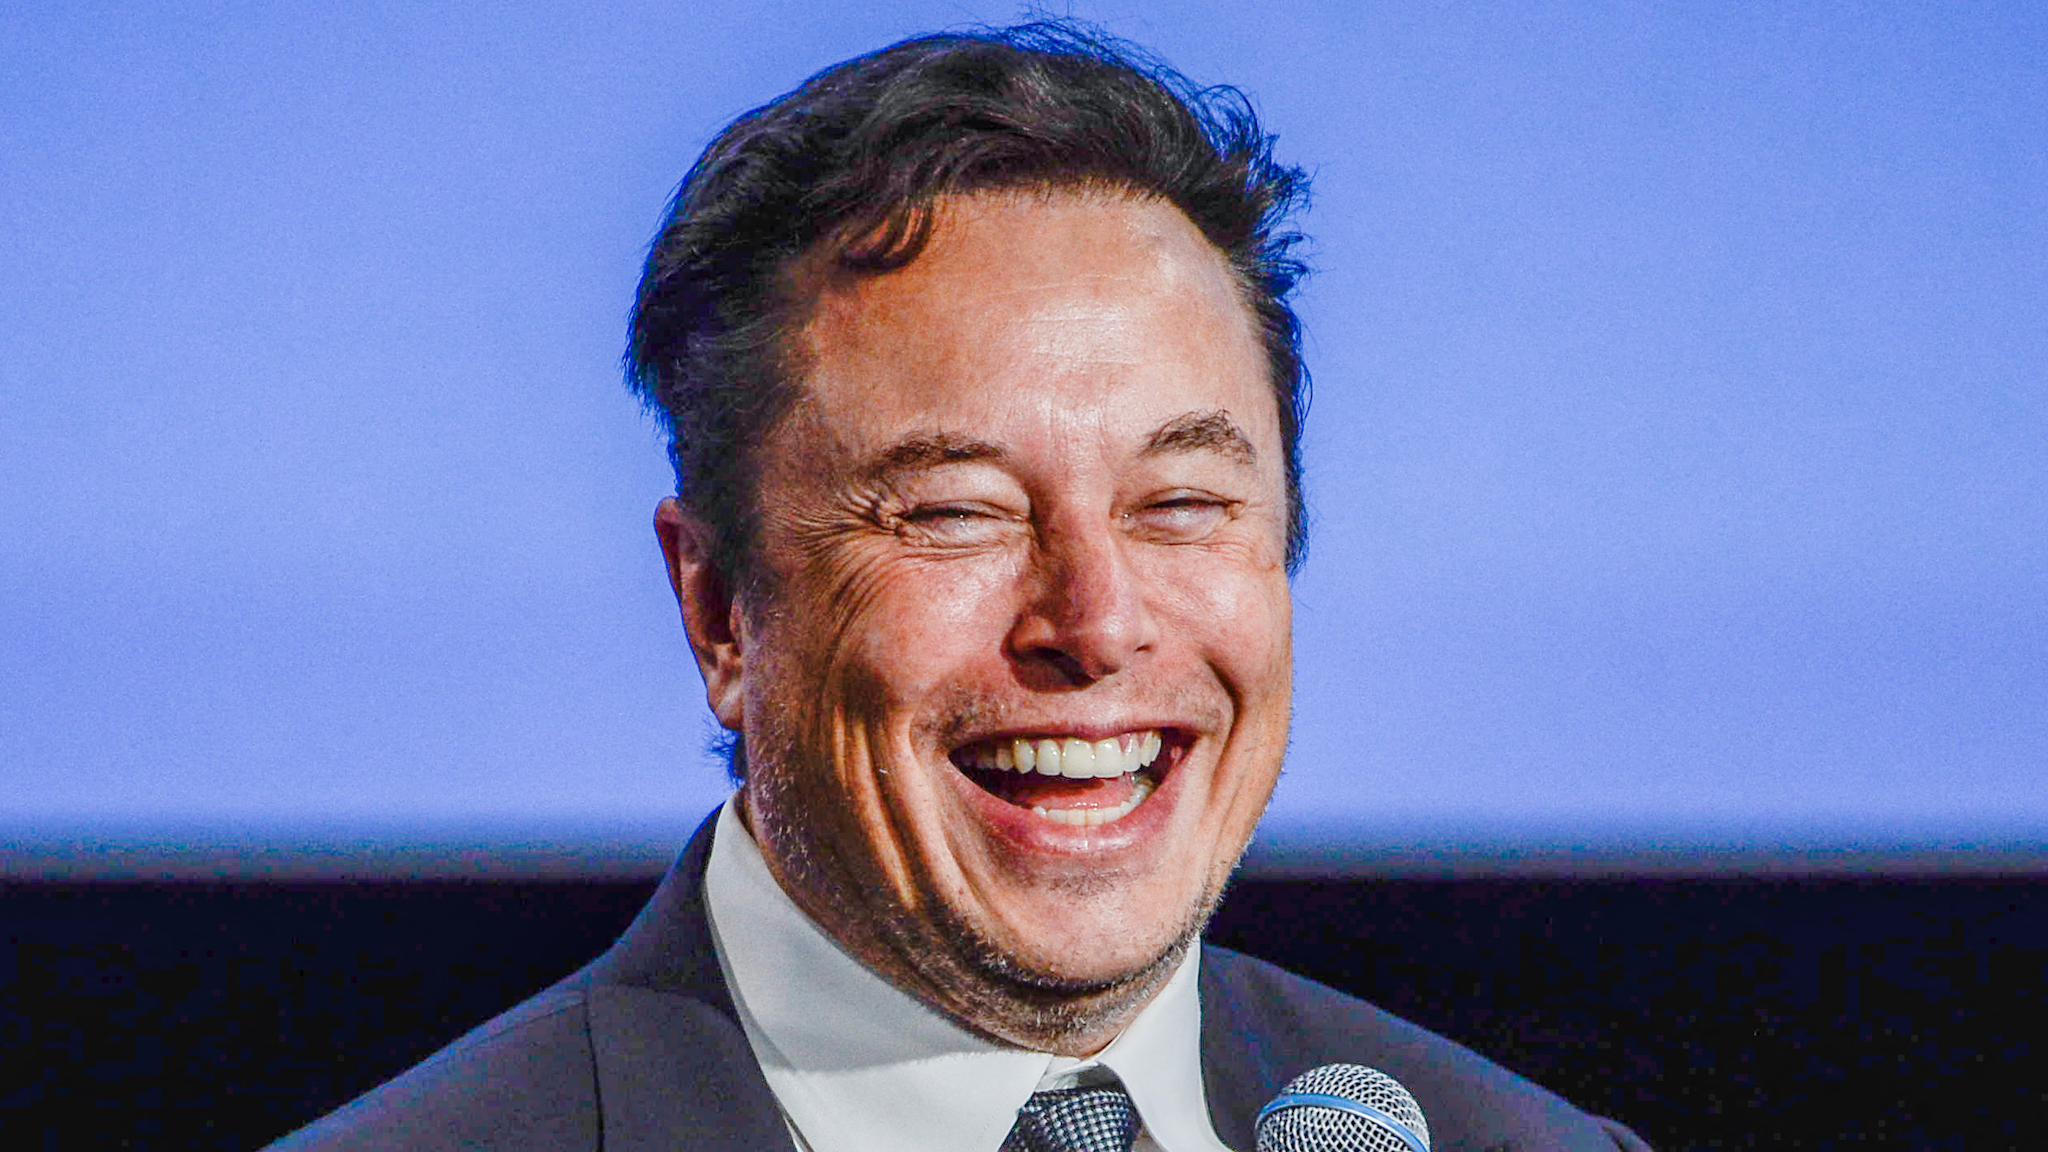 Tesla CEO Elon Musk smiles as he addresses guests at the Offshore Northern Seas 2022 (ONS) meeting in Stavanger, Norway on August 29, 2022. - The meeting, held in Stavanger from August 29 to September 1, 2022, presents the latest developments in Norway and internationally related to the energy, oil and gas sector.